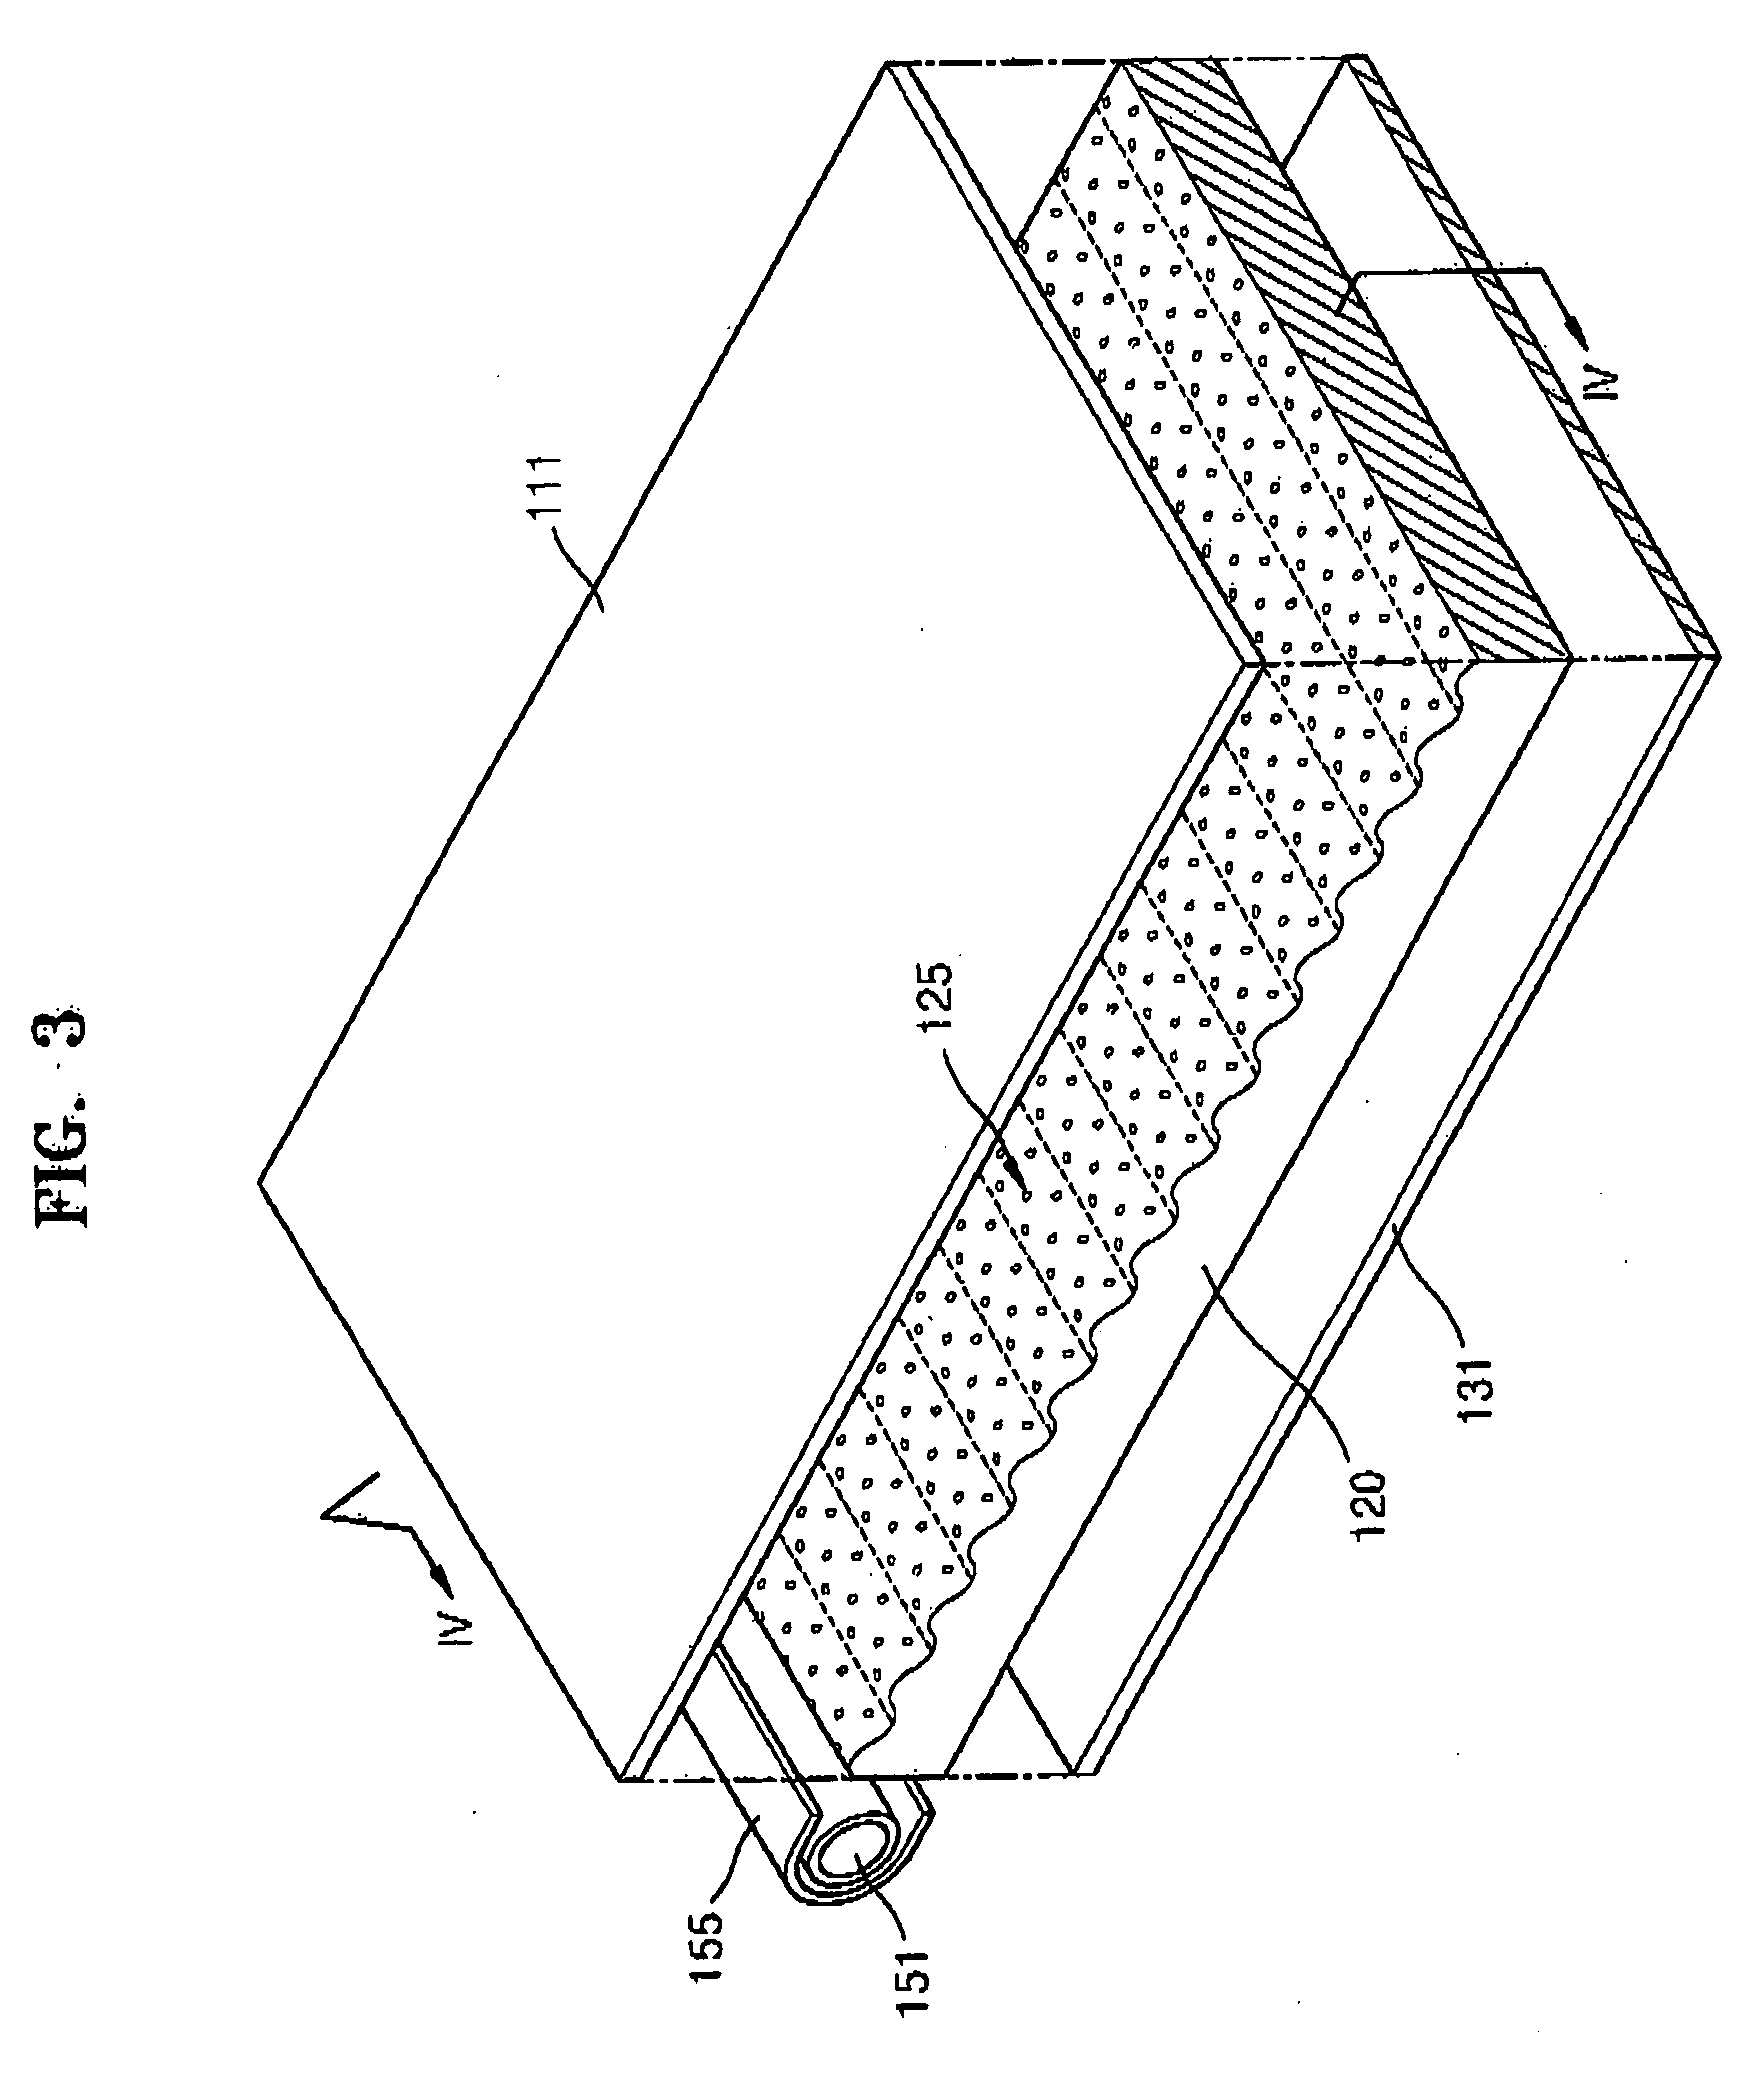 Backlight unit for flat panel display and flat panel display apparatus having the same